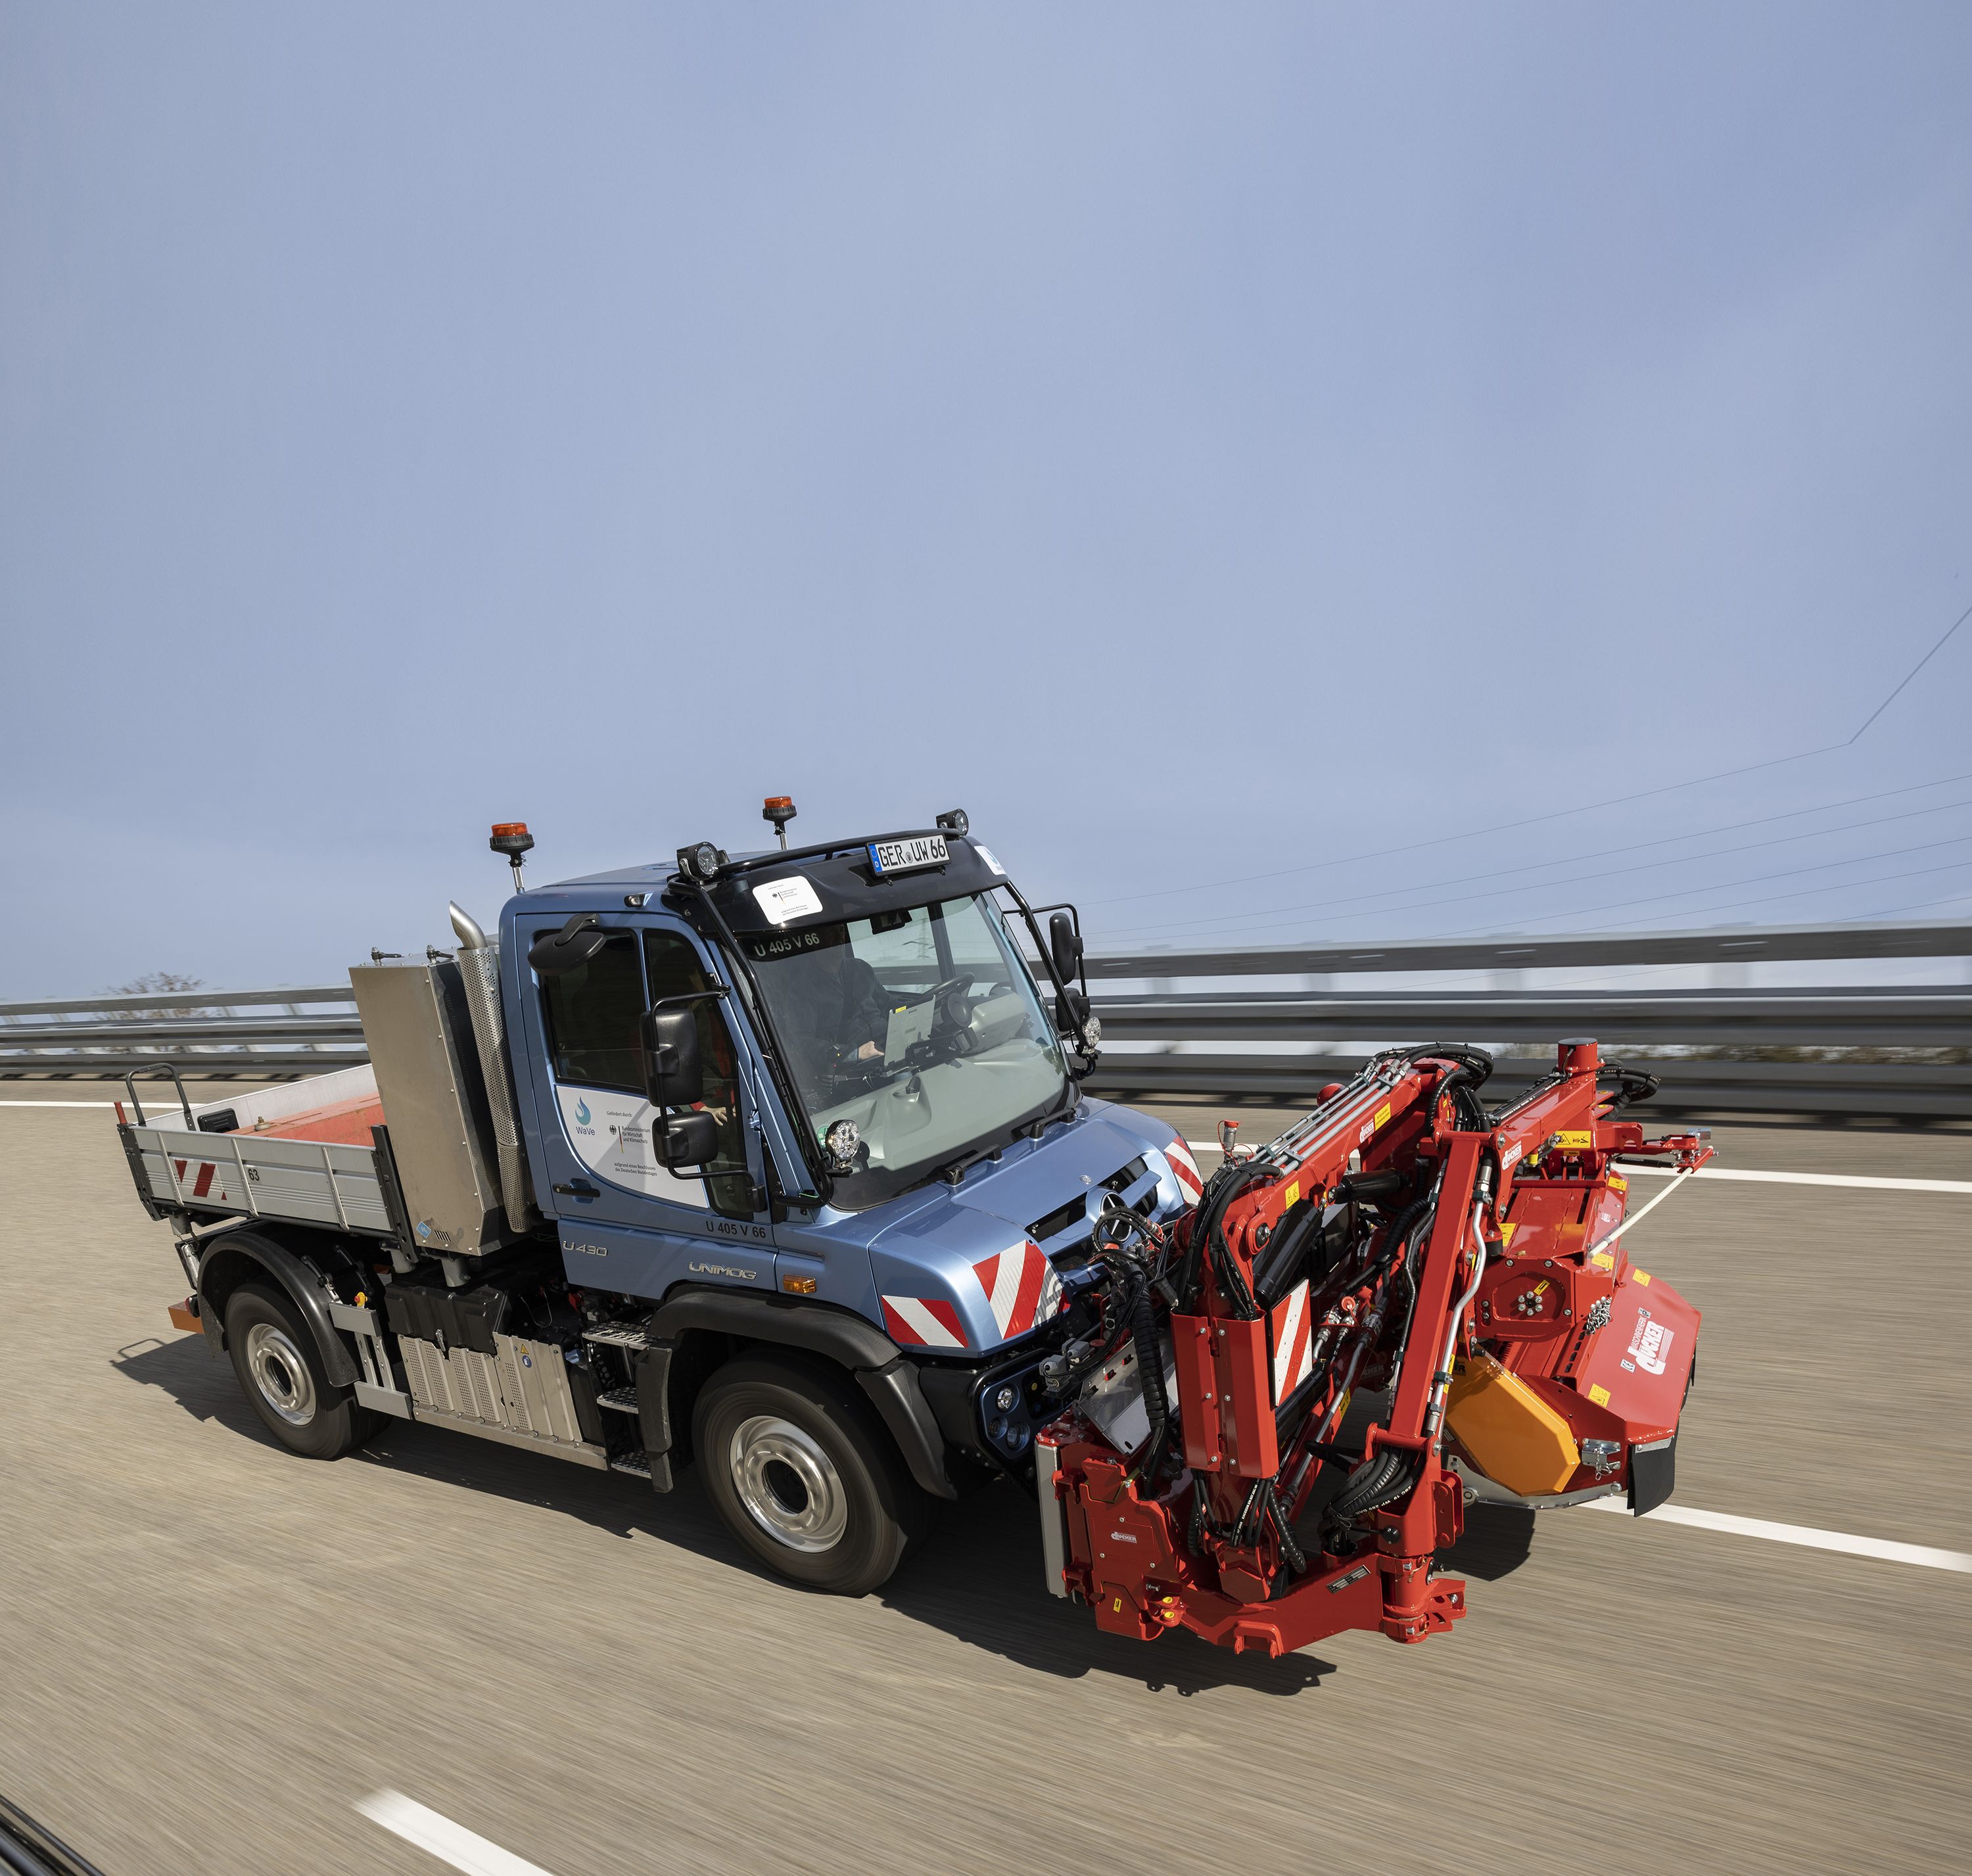 Check Out Mercedes' Zero-Emission Unimog—Powered by Hydrogen